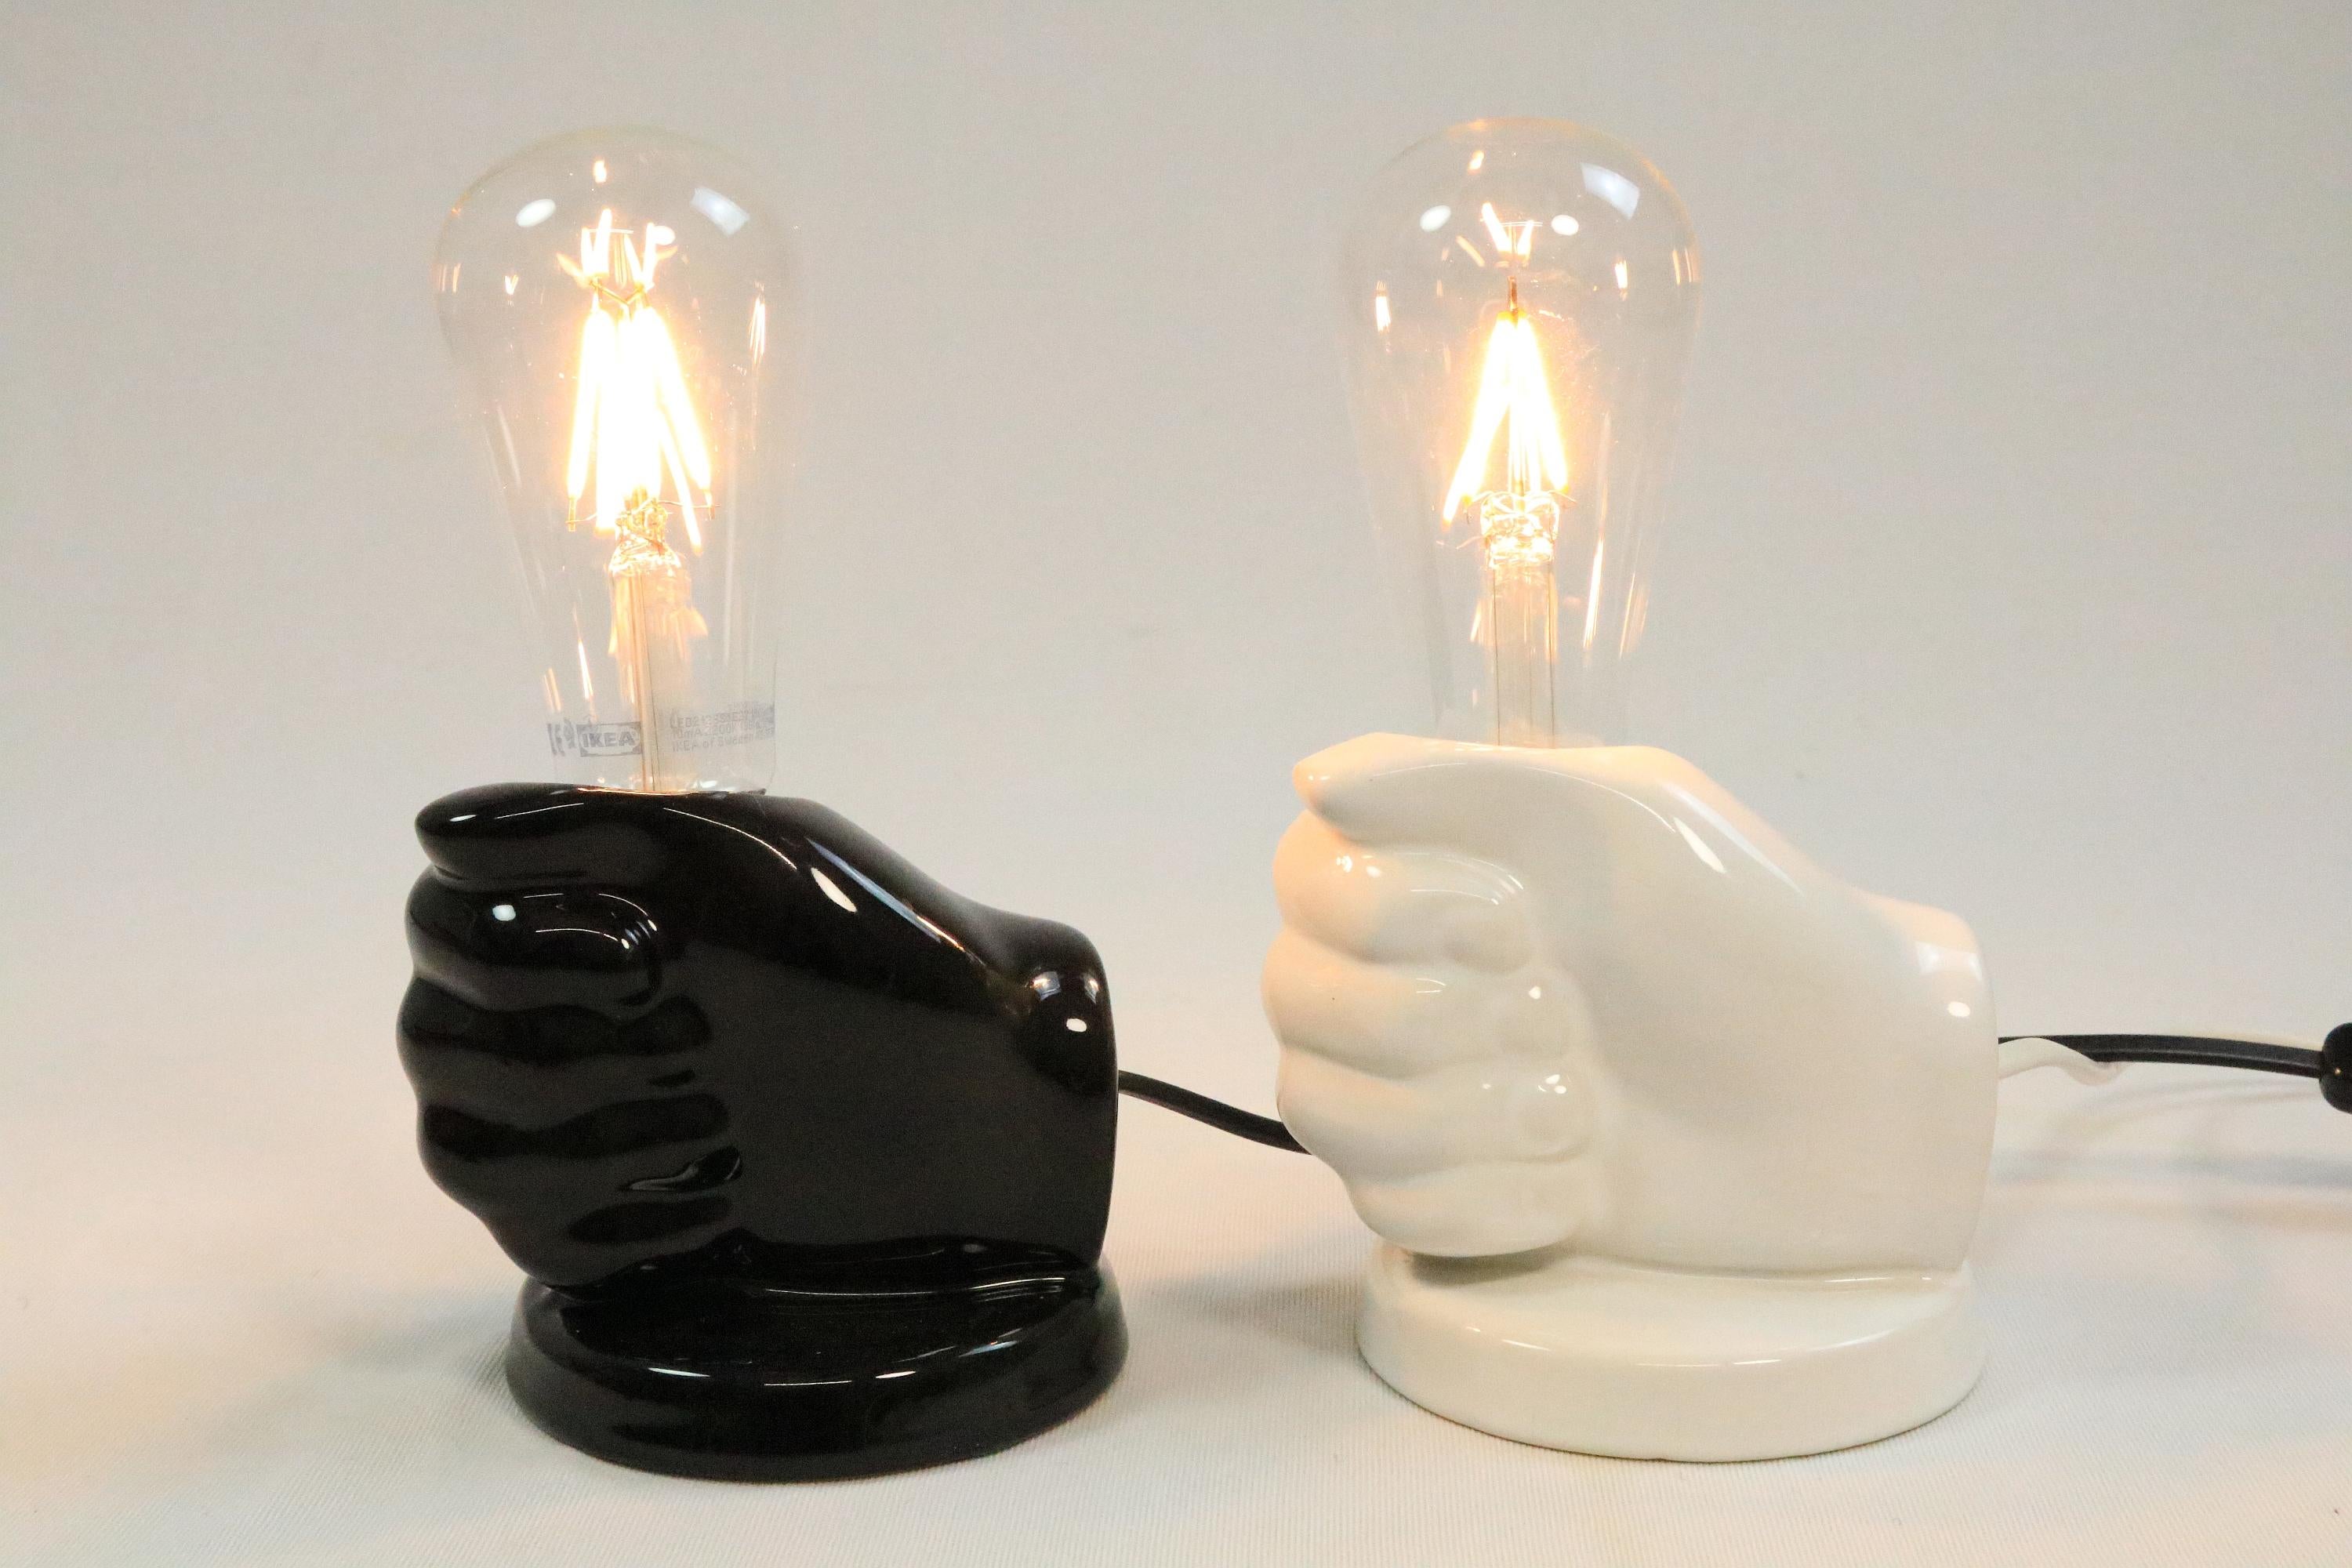 2 x Original 1980s small ceramic table lamps by ARO, Germany

Also looks great with another big bulb in White or Silver.

Height: with bulb: 18 cm / 7.09 inch

Bulb E27 is included (but works only in Europe. Could easily be changed by another bulb